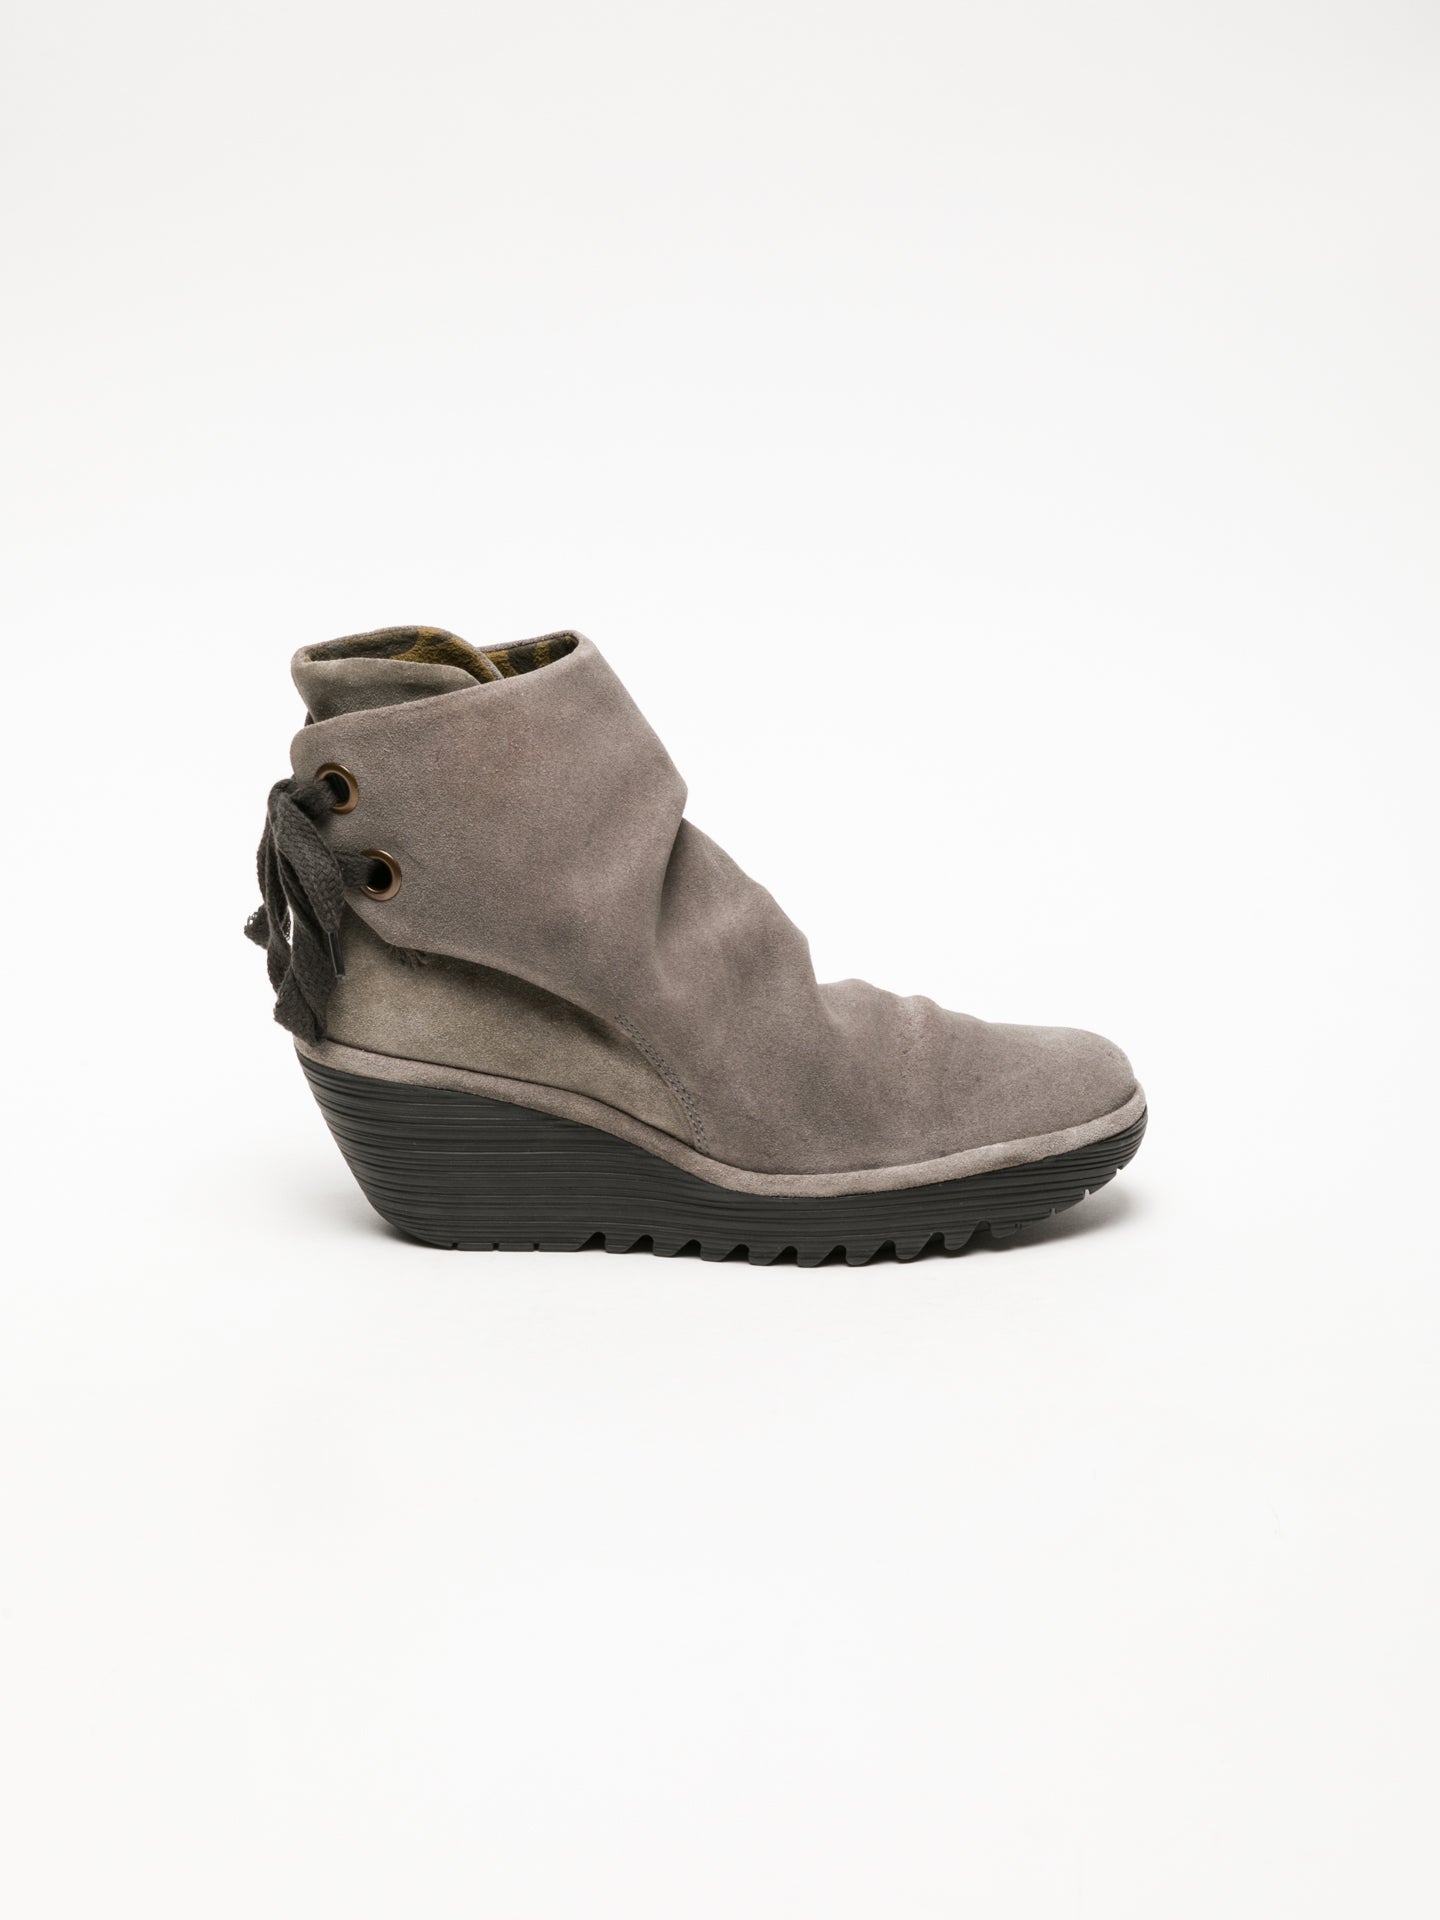 Fly London Gray Wedge Ankle Boots